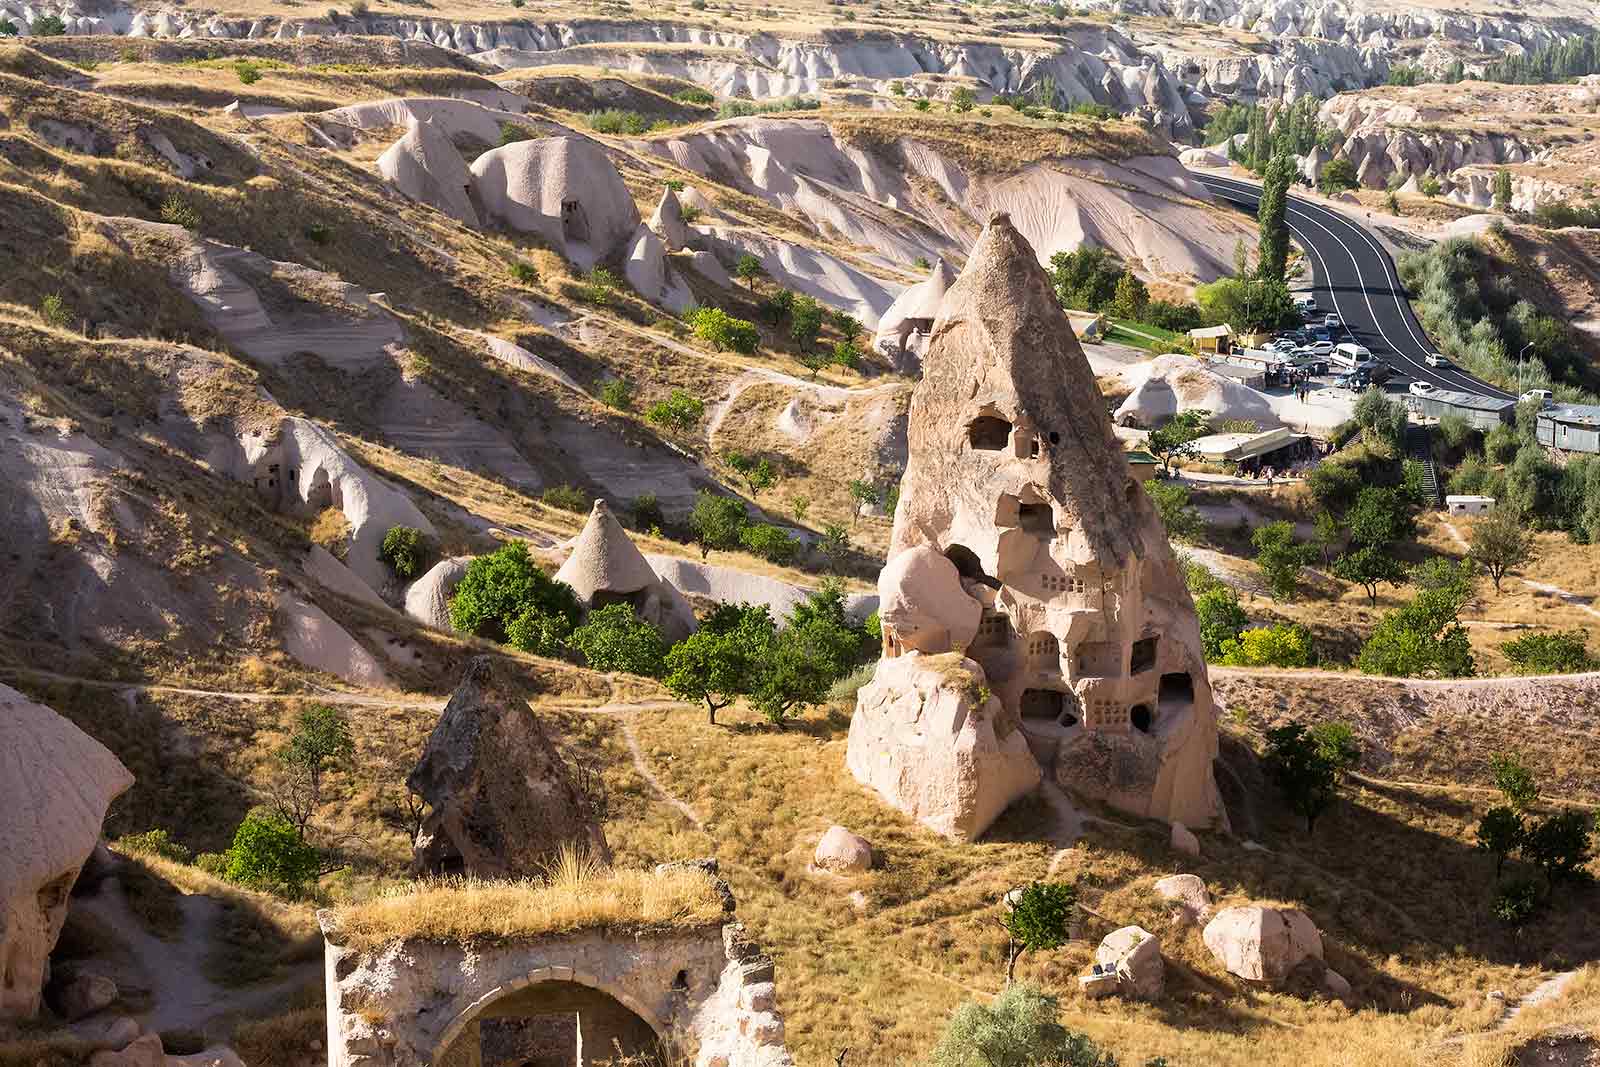 It's said that the long defense tunnels of towns with citadels (like Uchisar) reached far into the surrounding areas. However, since these tunnels have collapsed in places, the theory can't be confirmed, but is still a popular myth.